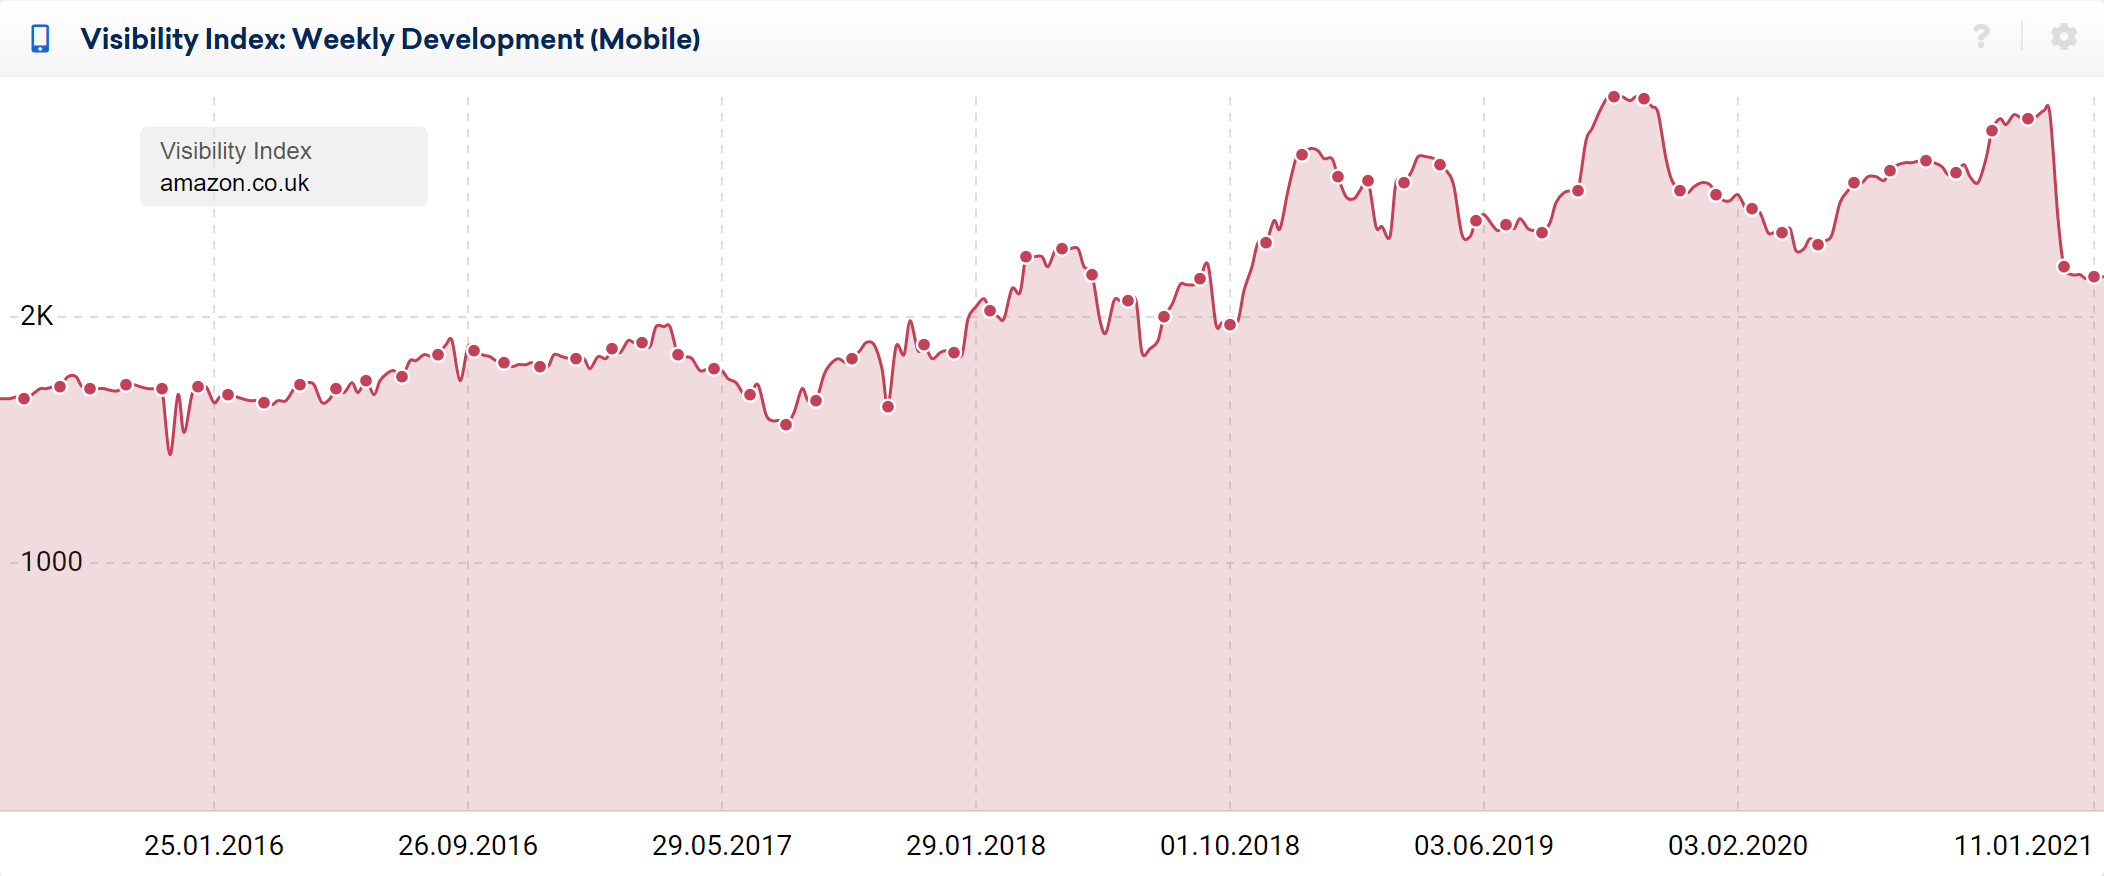 Visibility Index graph for amazon.co.uk